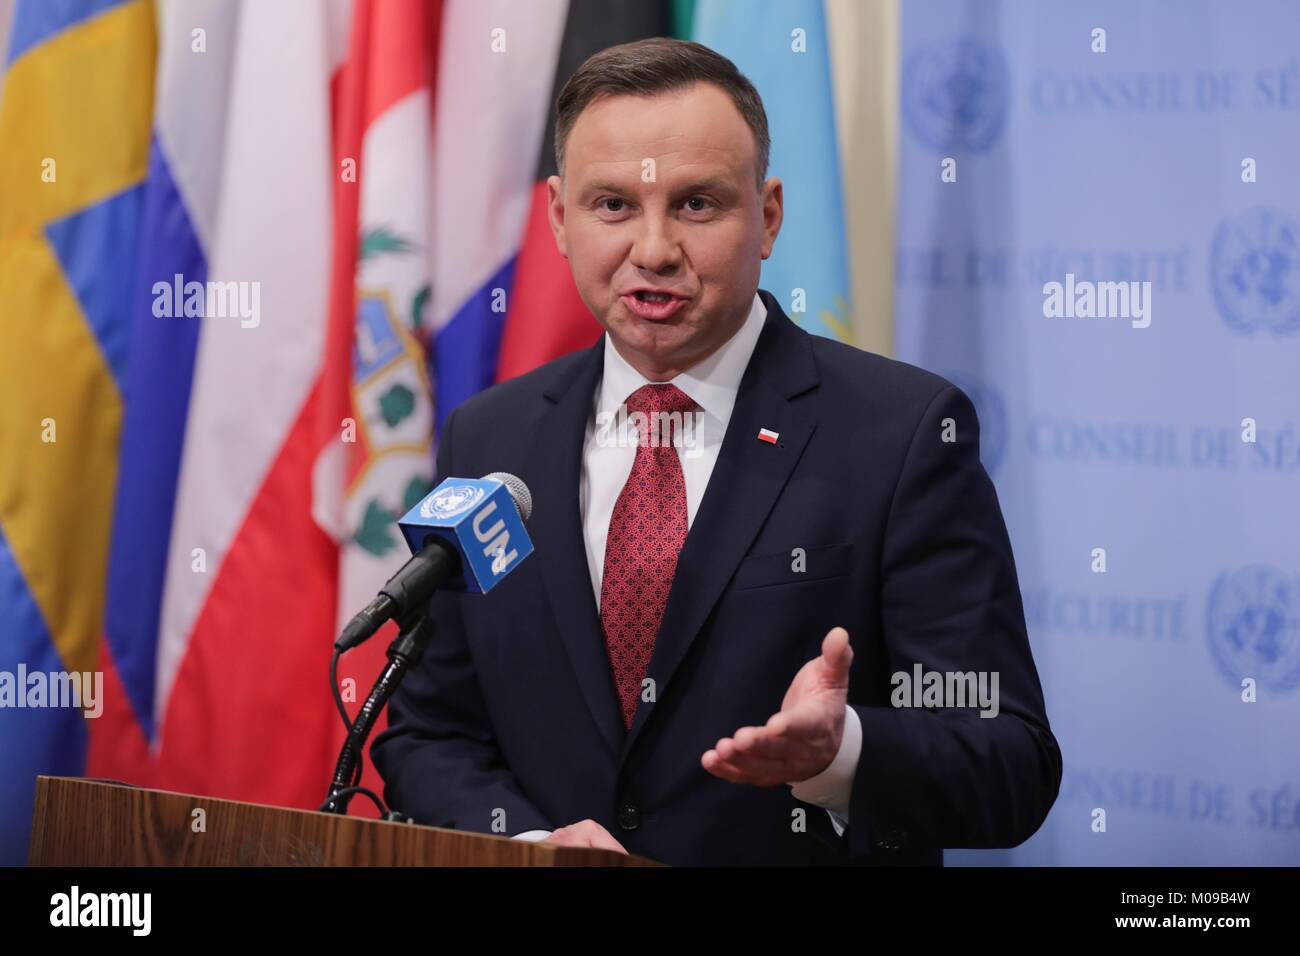 United Nations, New York, USA, January 18 2018 - Andrzej Duda, President of the Republic of Poland presser after the Security Council meeting on Non-proliferation of Weapons of Mass Destruction today at the UN Headquarters in New York City. Photo: Luiz Rampelotto/EuropaNewswire *** Local Caption *** 00005862 | usage worldwide Stock Photo